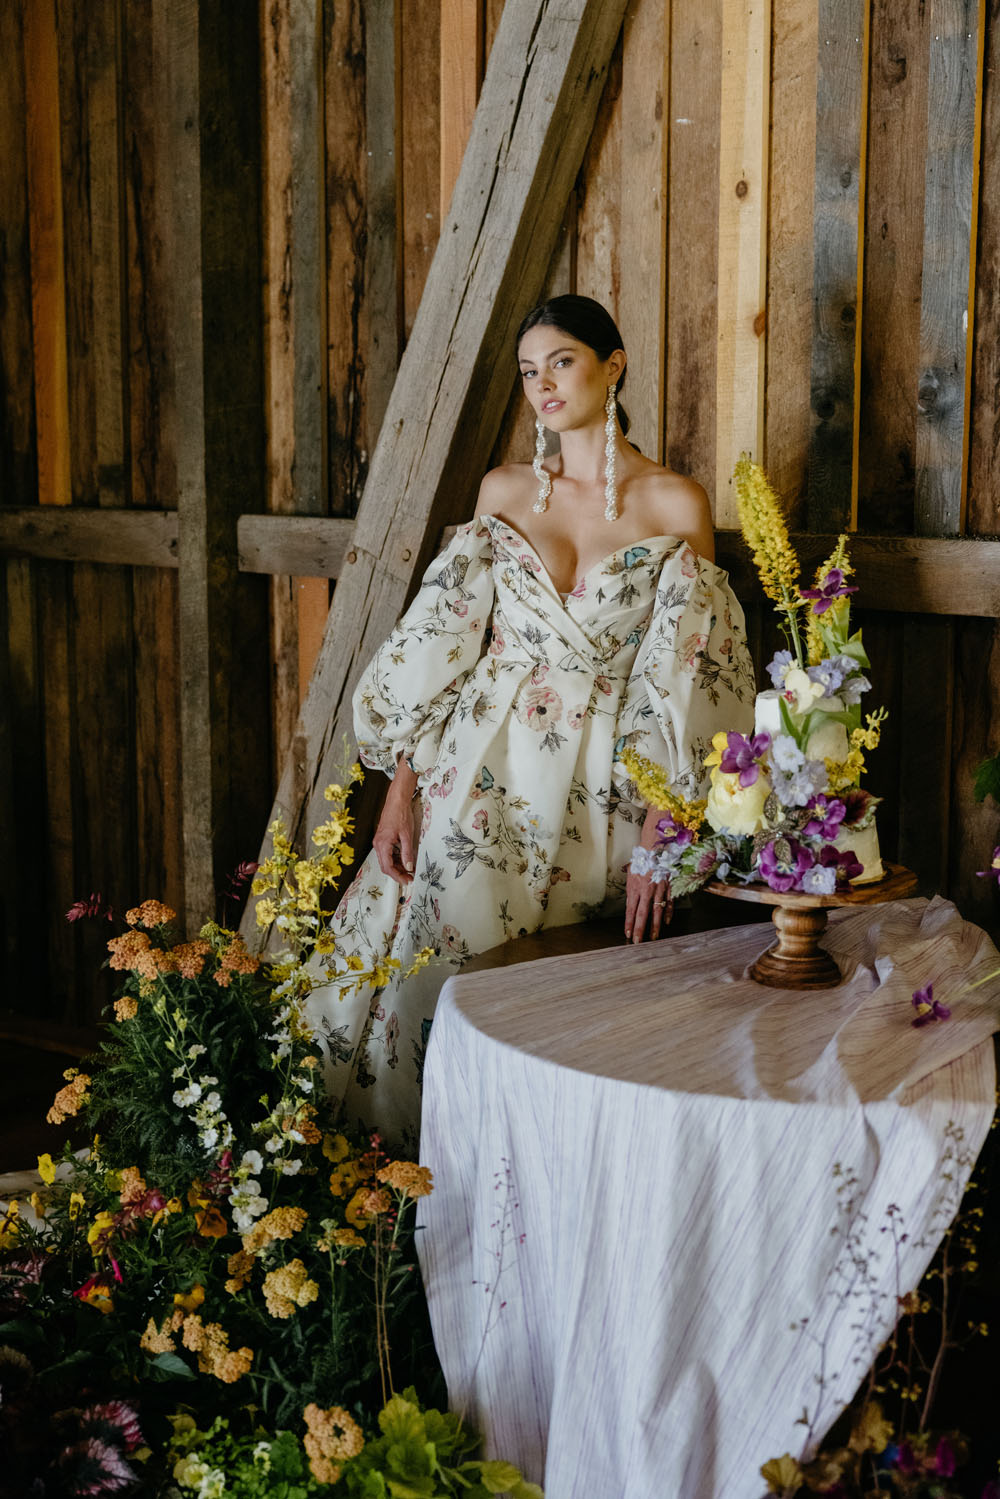 Luxe summer mountain wedding ideas with a floral gown